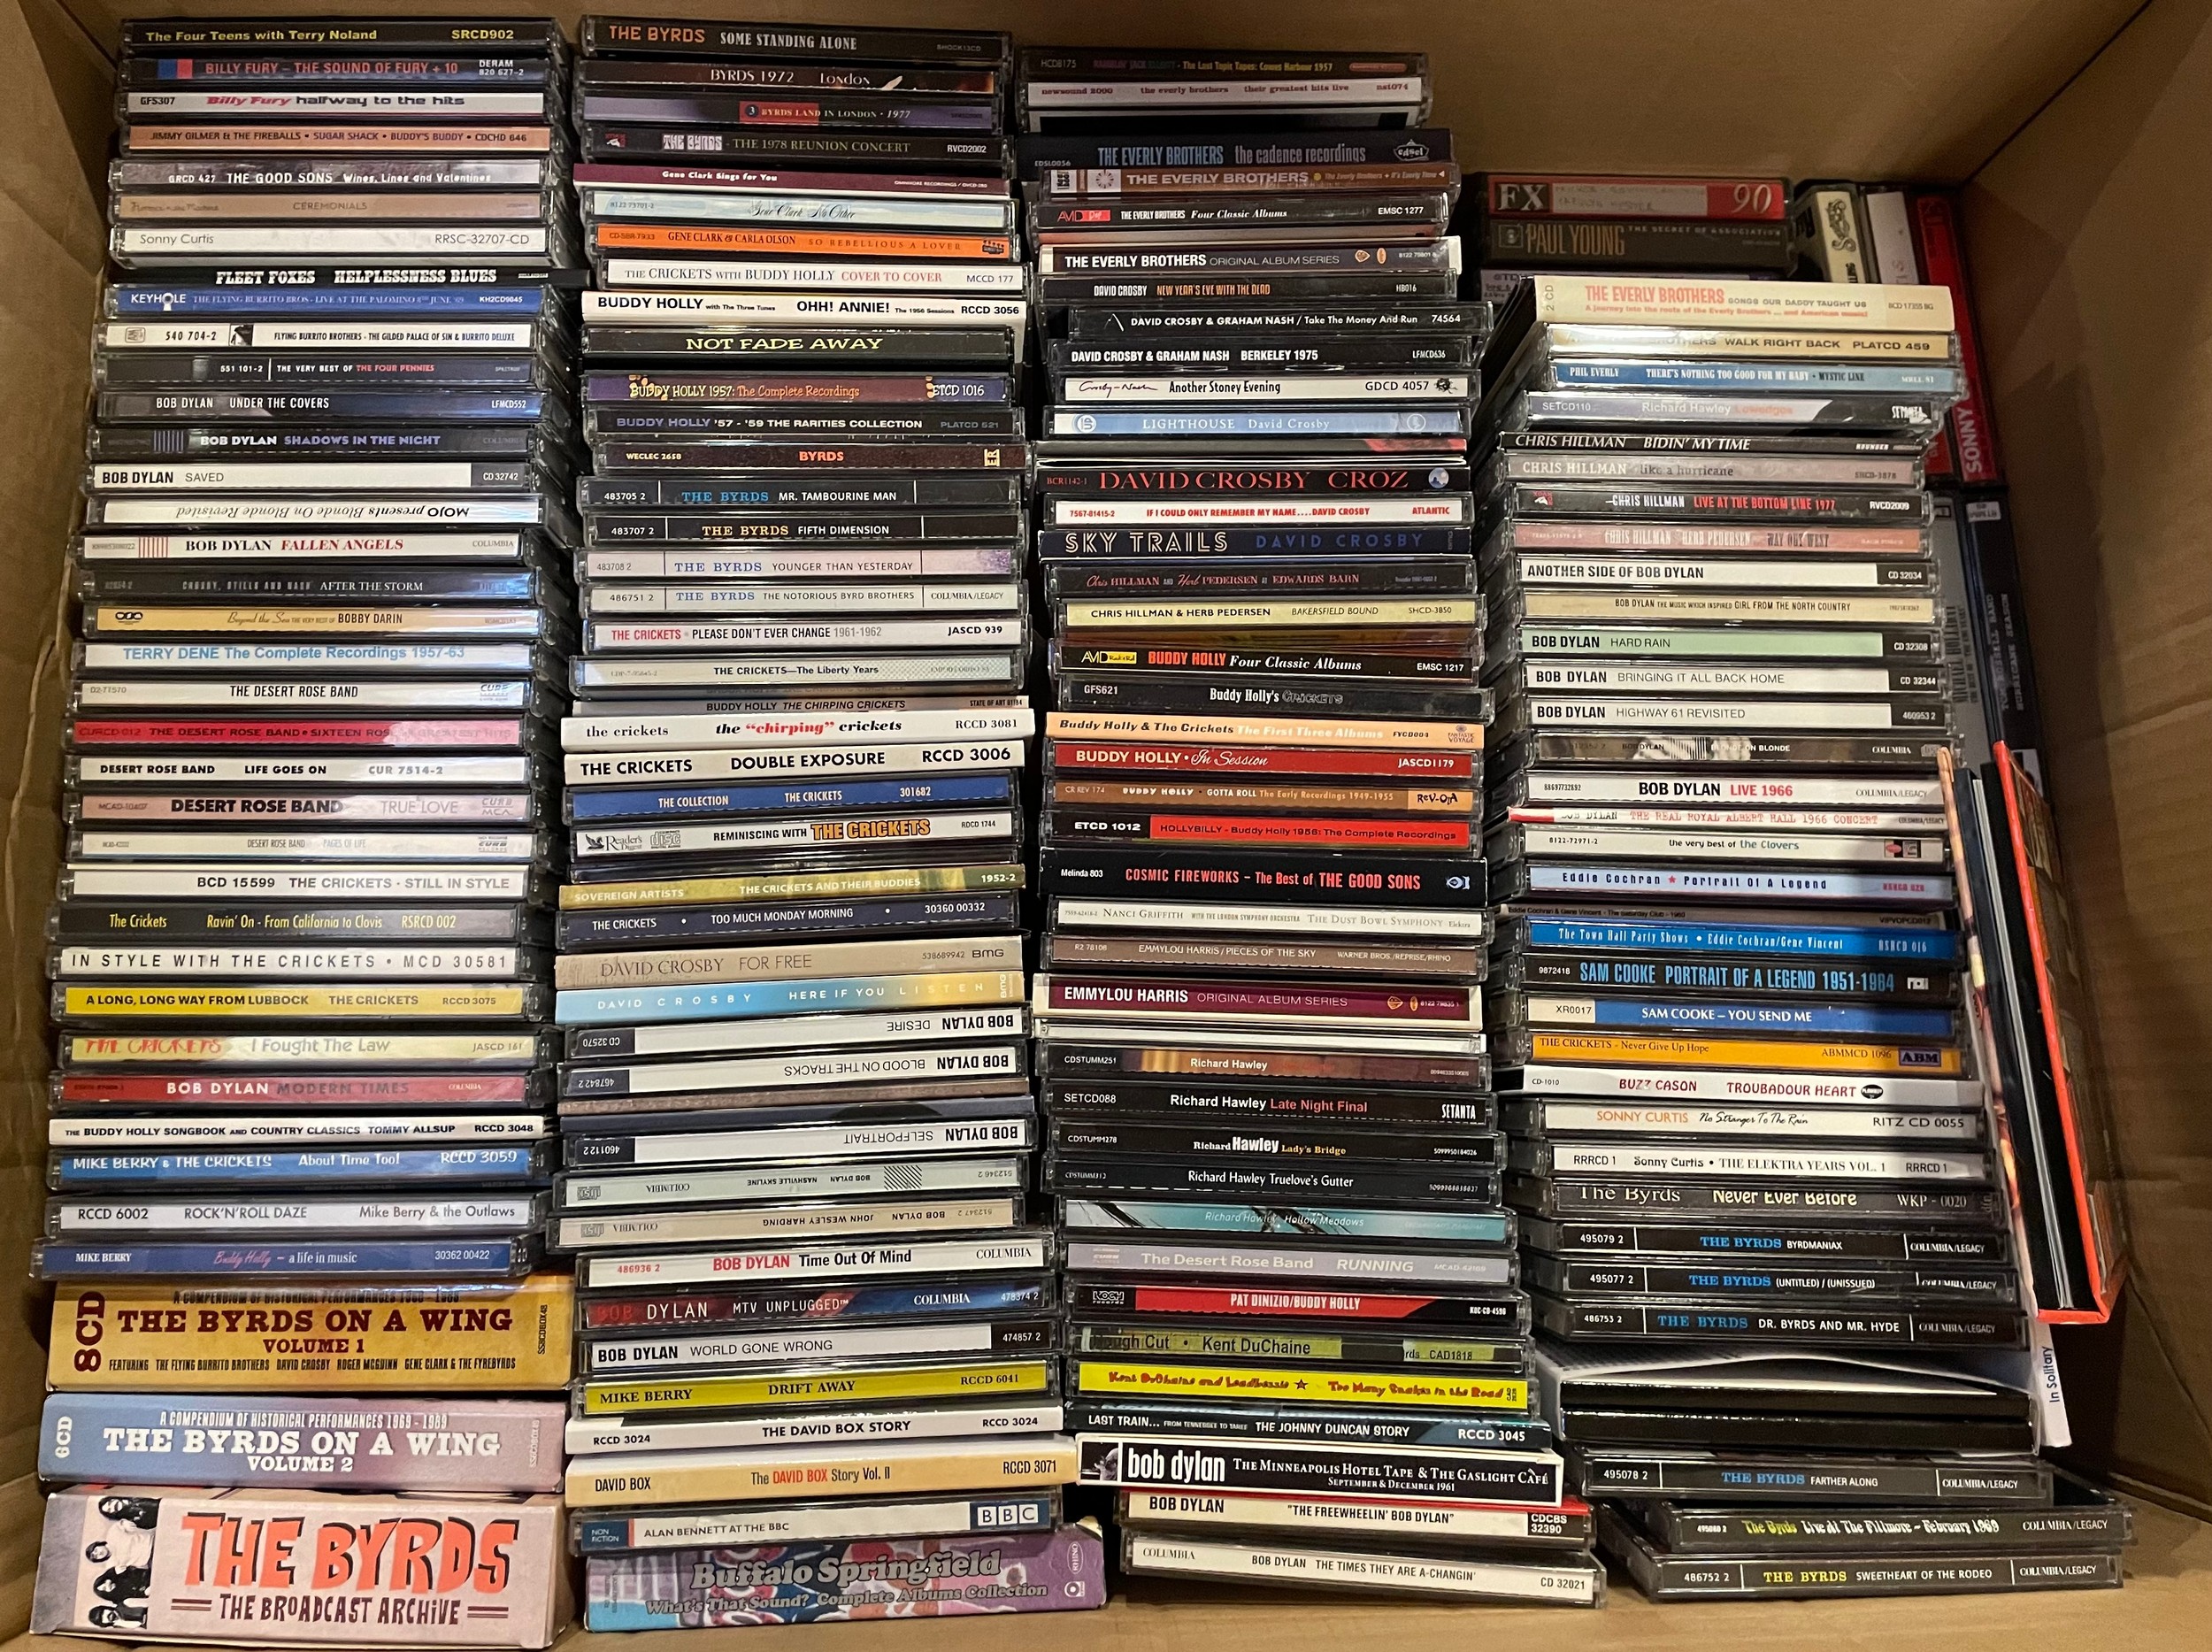 A large collection of music CD's, vinyl records and tapes.